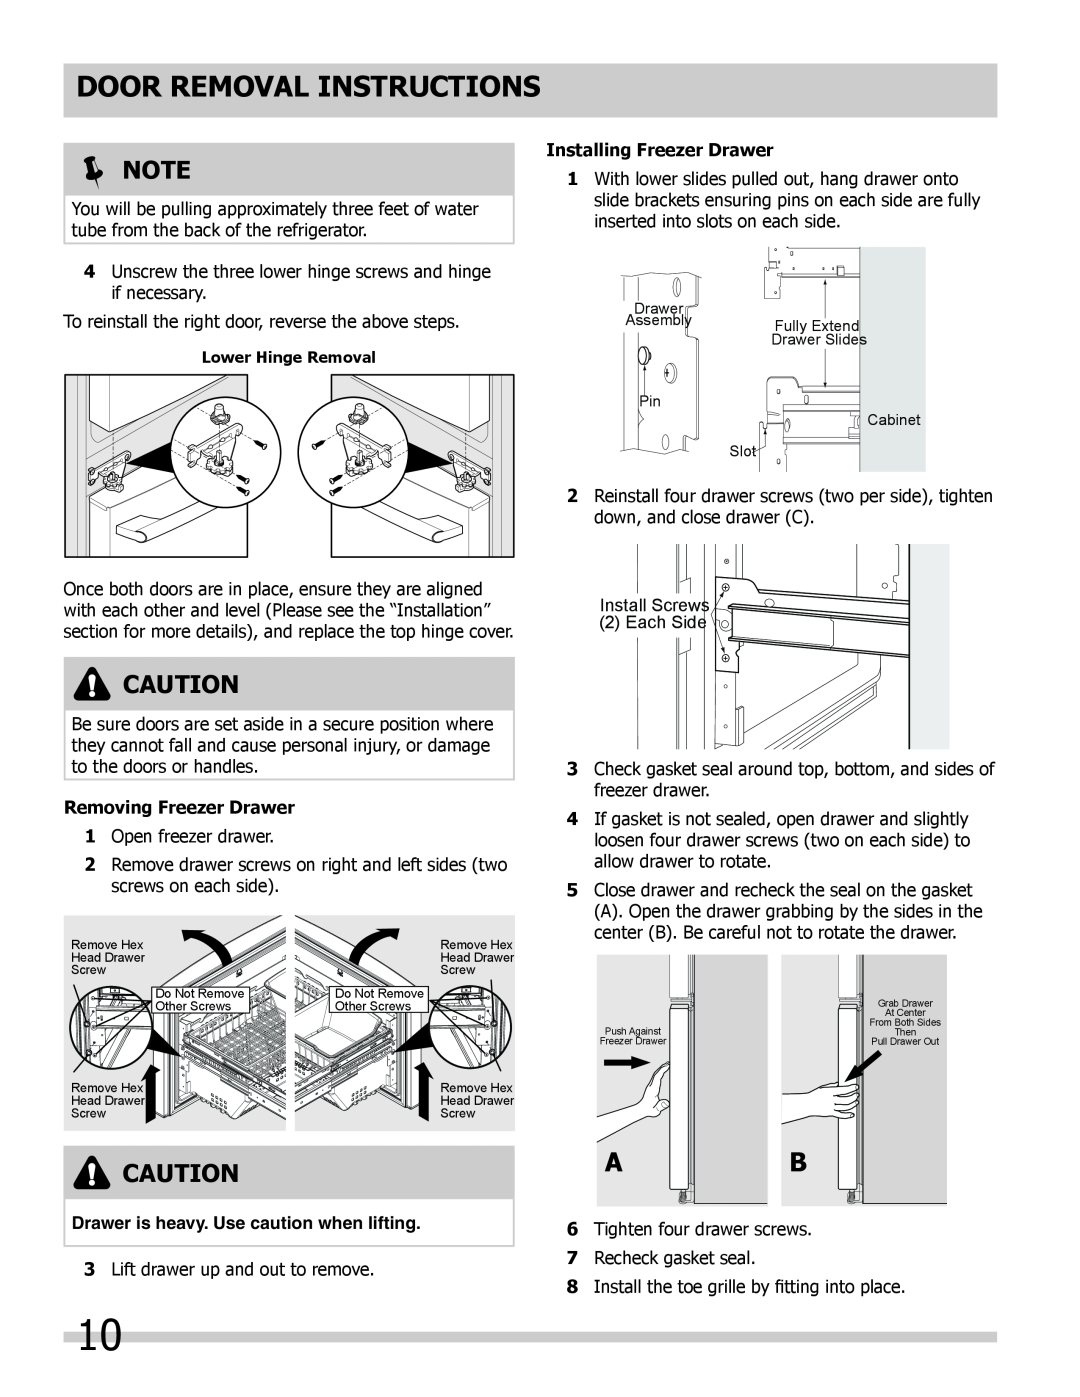 Frigidaire 242292000 manual Install Screws 2 Each Side, Door Removal Instructions,  Note 